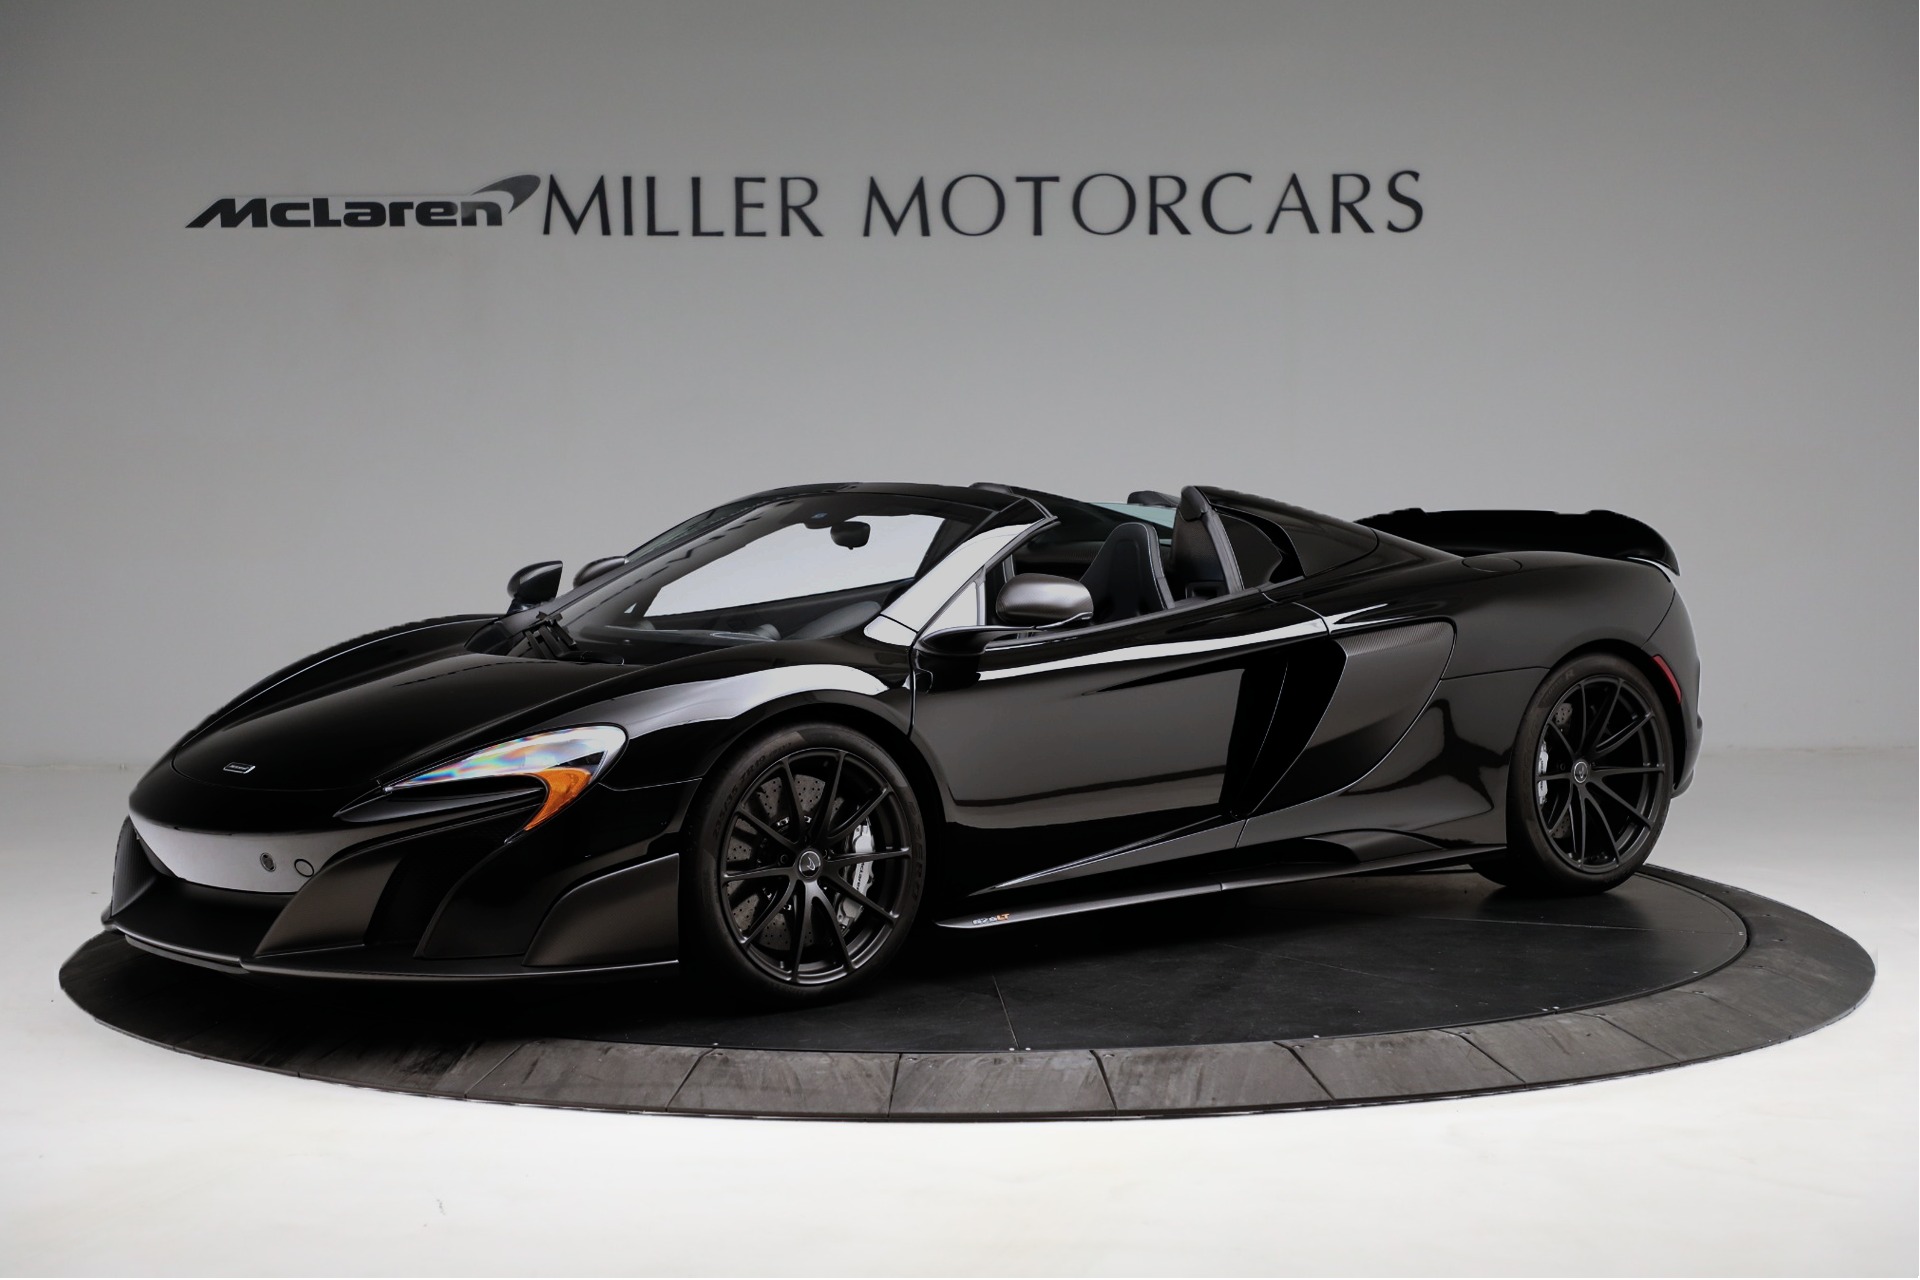 Used 2016 McLaren 675LT Spider for sale $365,900 at Aston Martin of Greenwich in Greenwich CT 06830 1